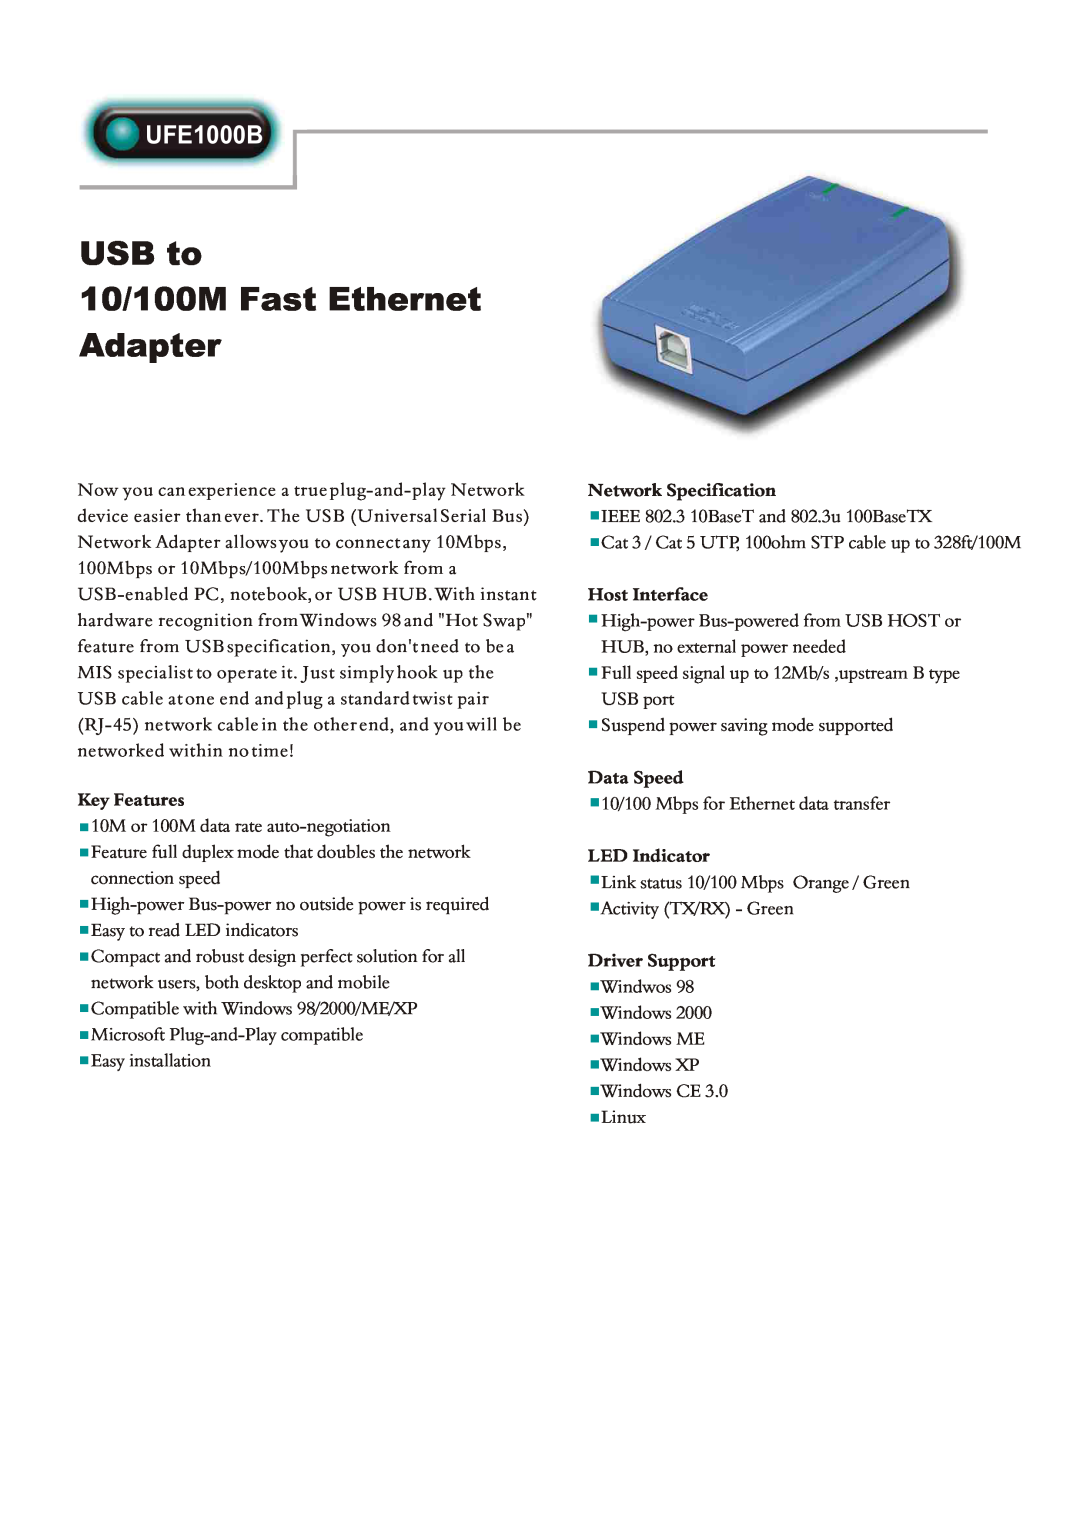 Abocom UFE1000B manual USB to 10/100M Fast Ethernet Adapter, Key Features, Network Specification, Host Interface 